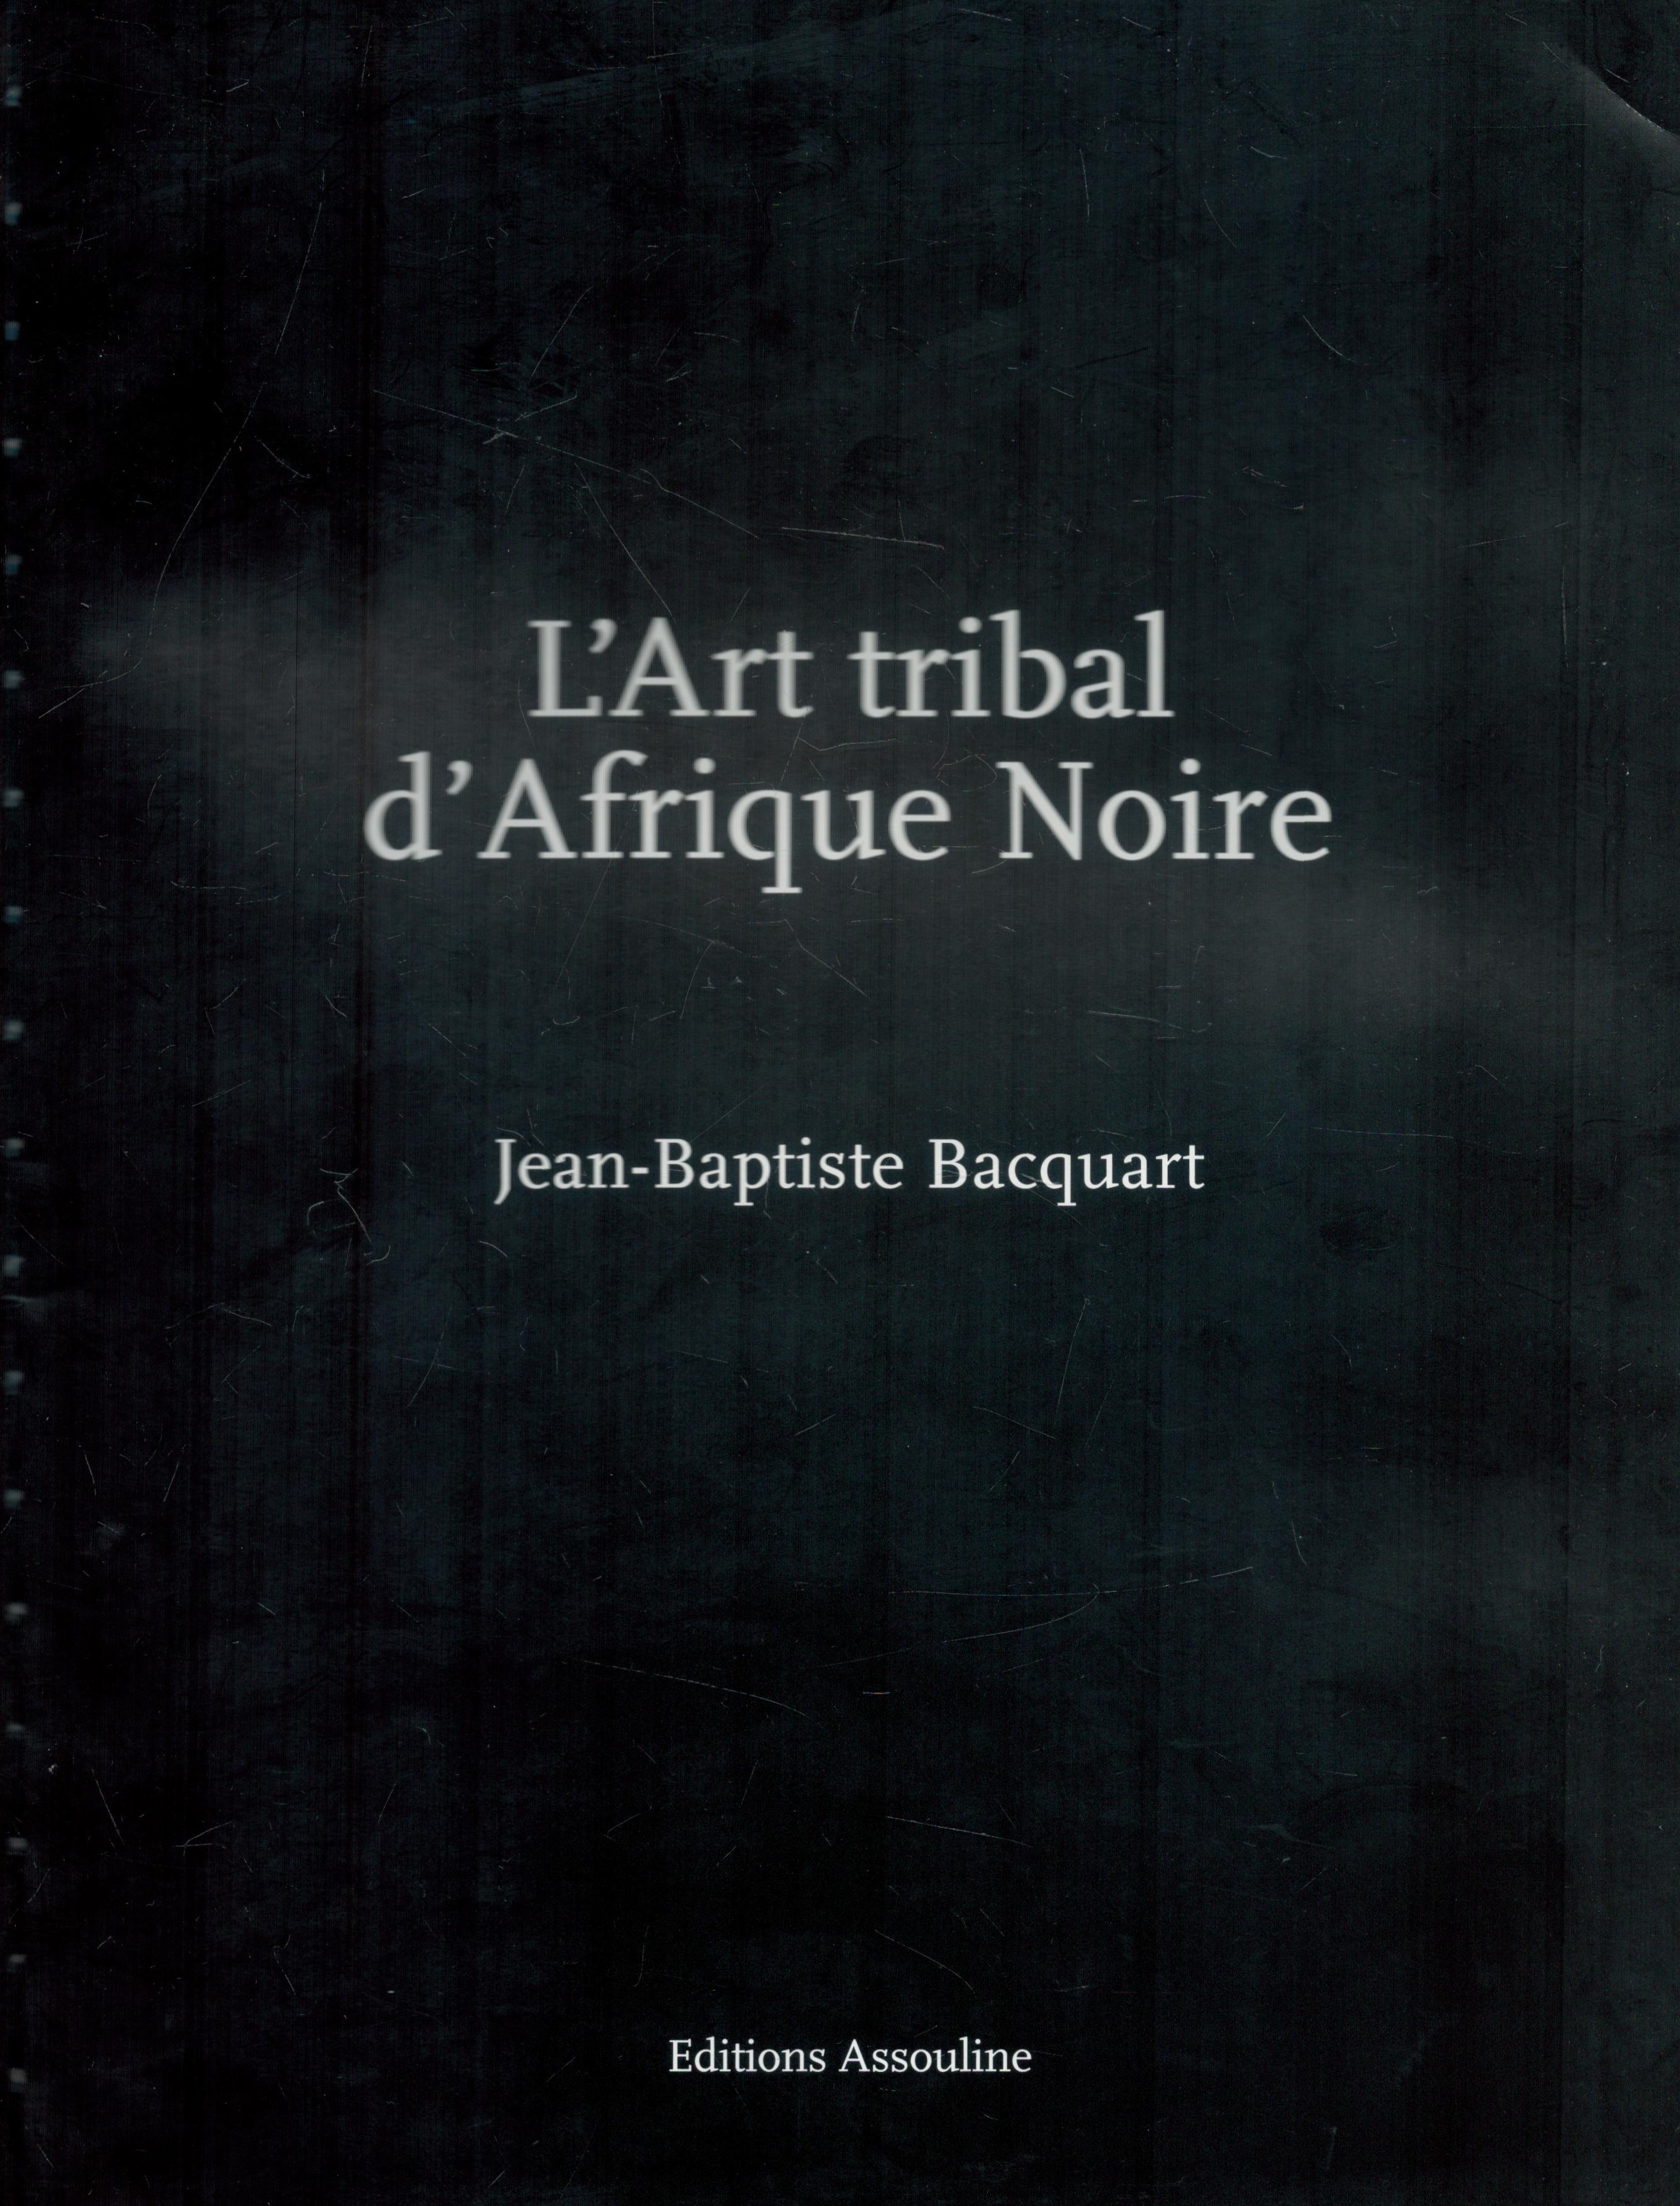 L'Art Tribal d'Afrique Noire by Jean-Baptiste Bacquart 1998 hardback book with 240 pages, early - Image 2 of 3